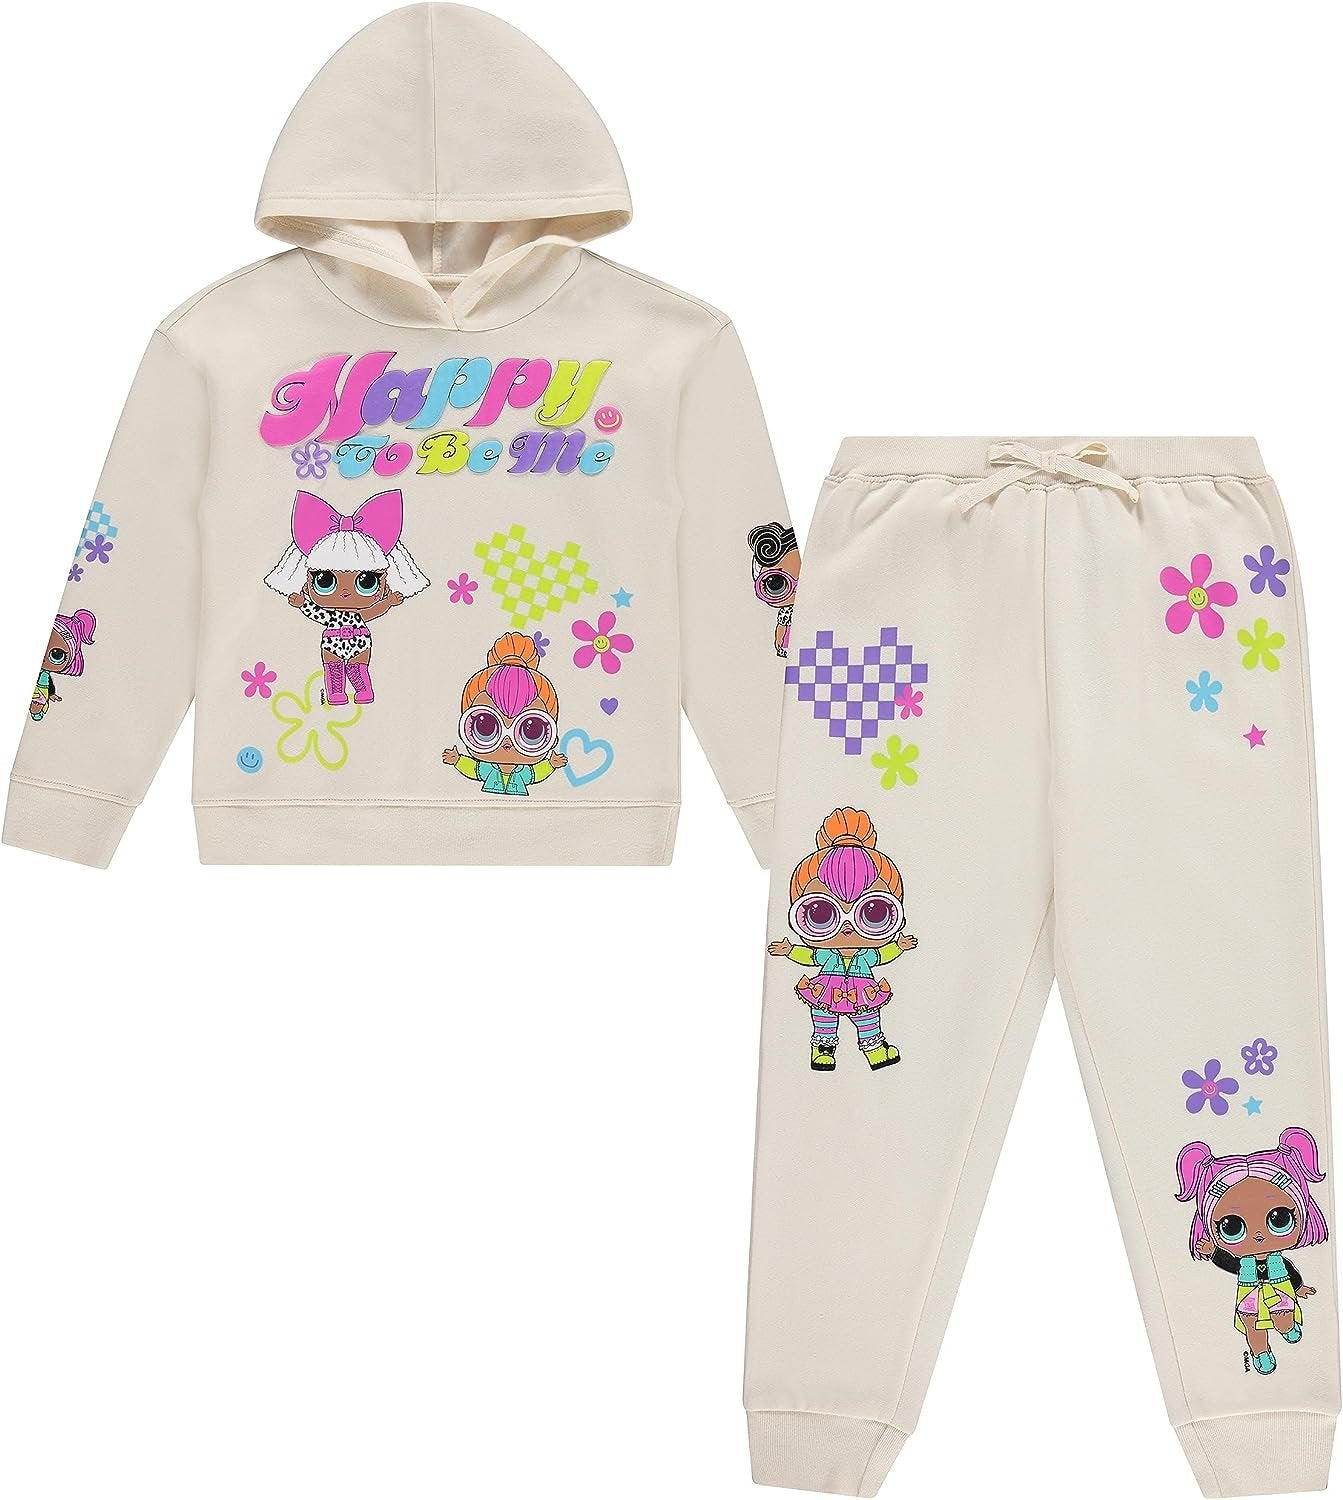 L.O.L. Surprise! Girls Pullover Hoodie and Jogger Clothing Set - Sizes 4-16